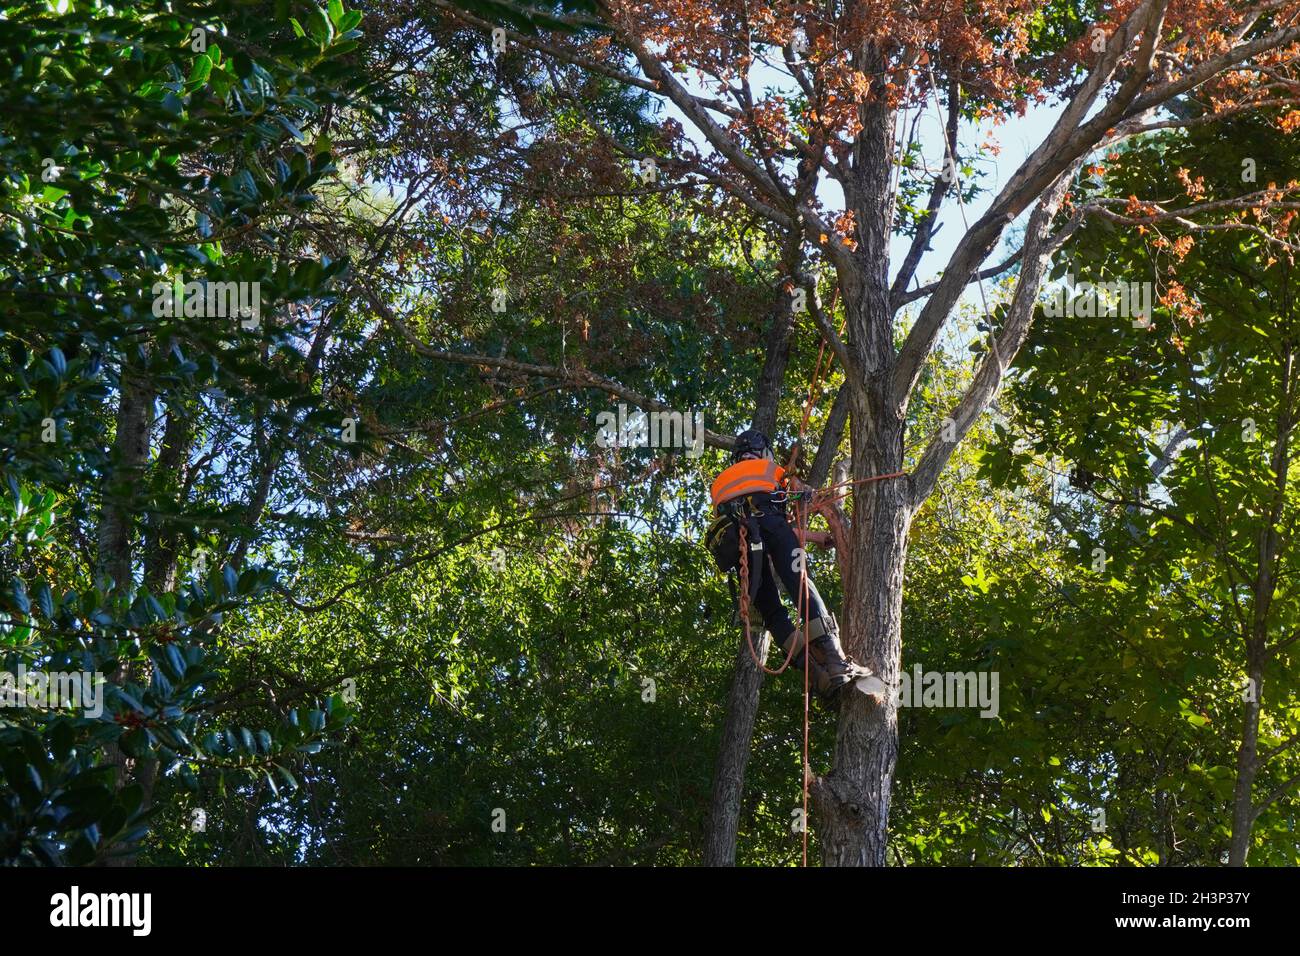 Arborist climbing a dead tree in preparation for tree removal Stock Photo